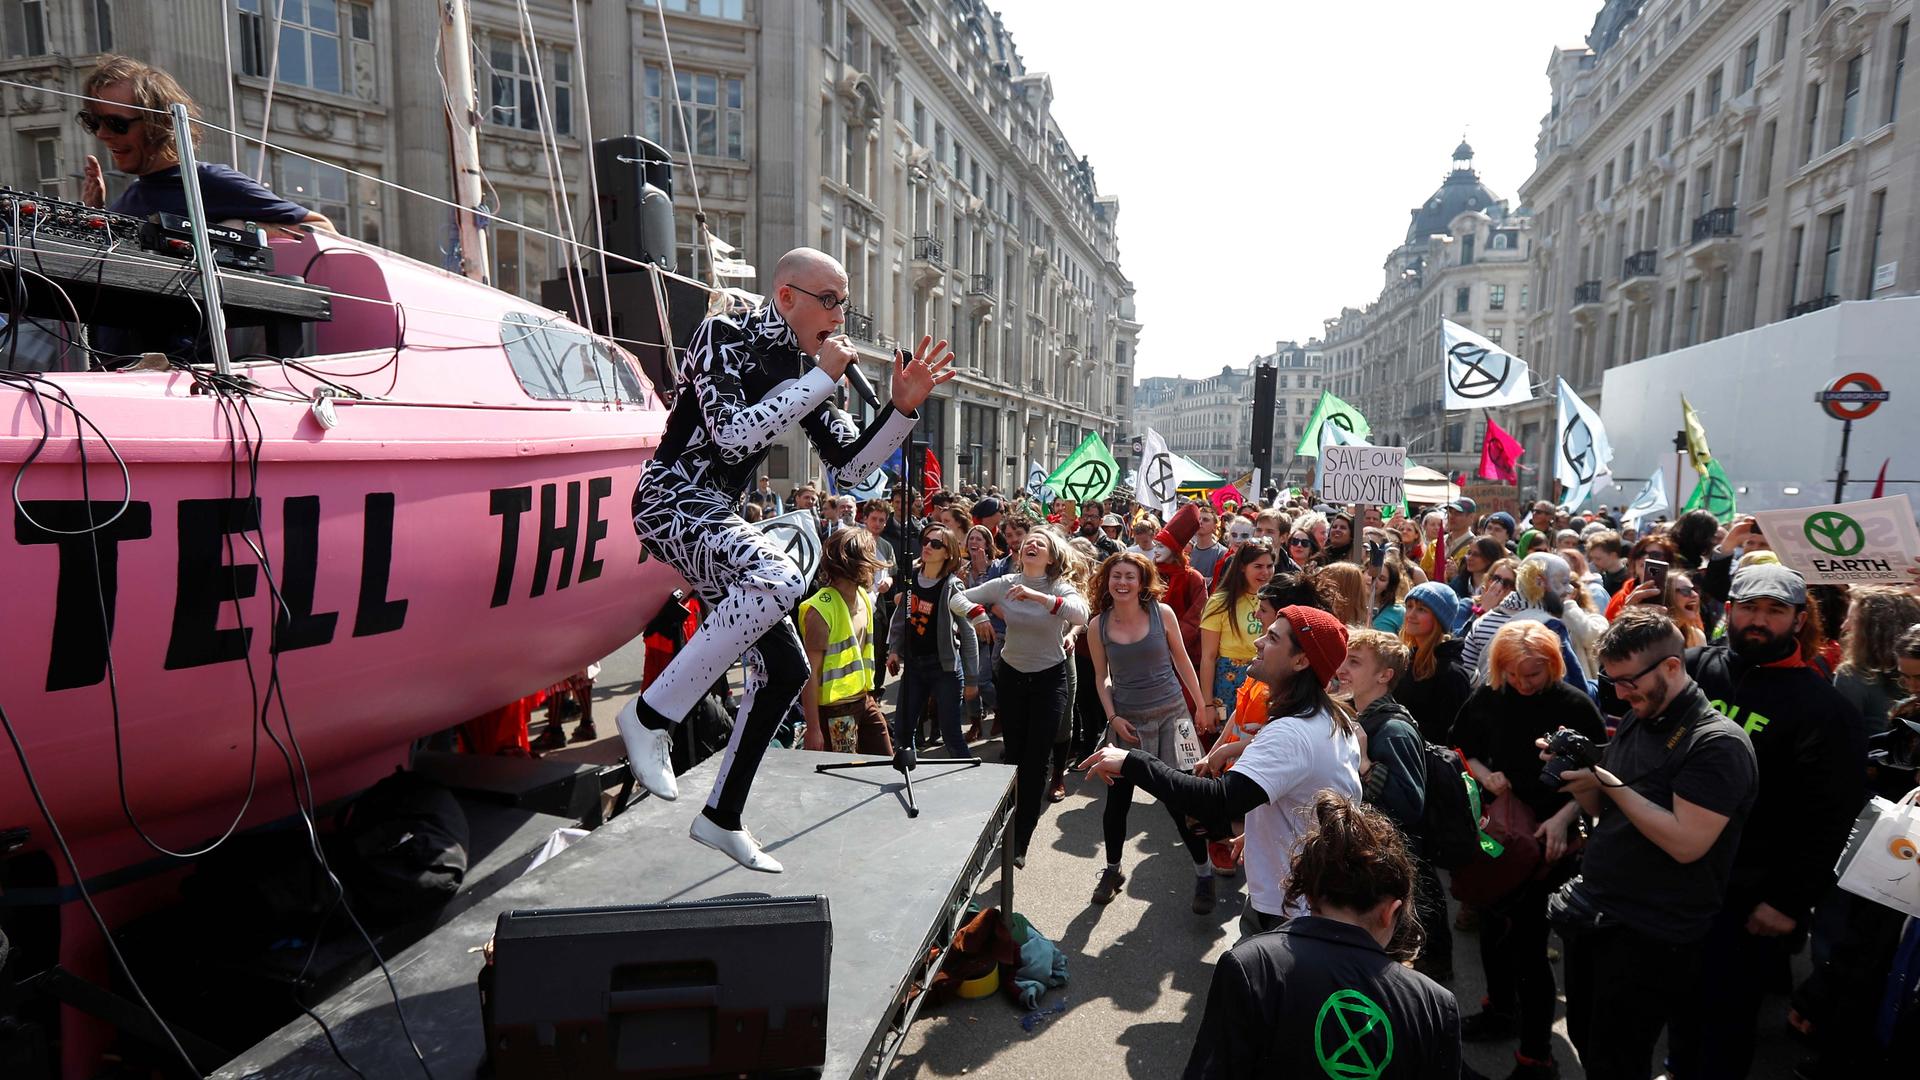 A man on a platform performs to a crowd of protestors